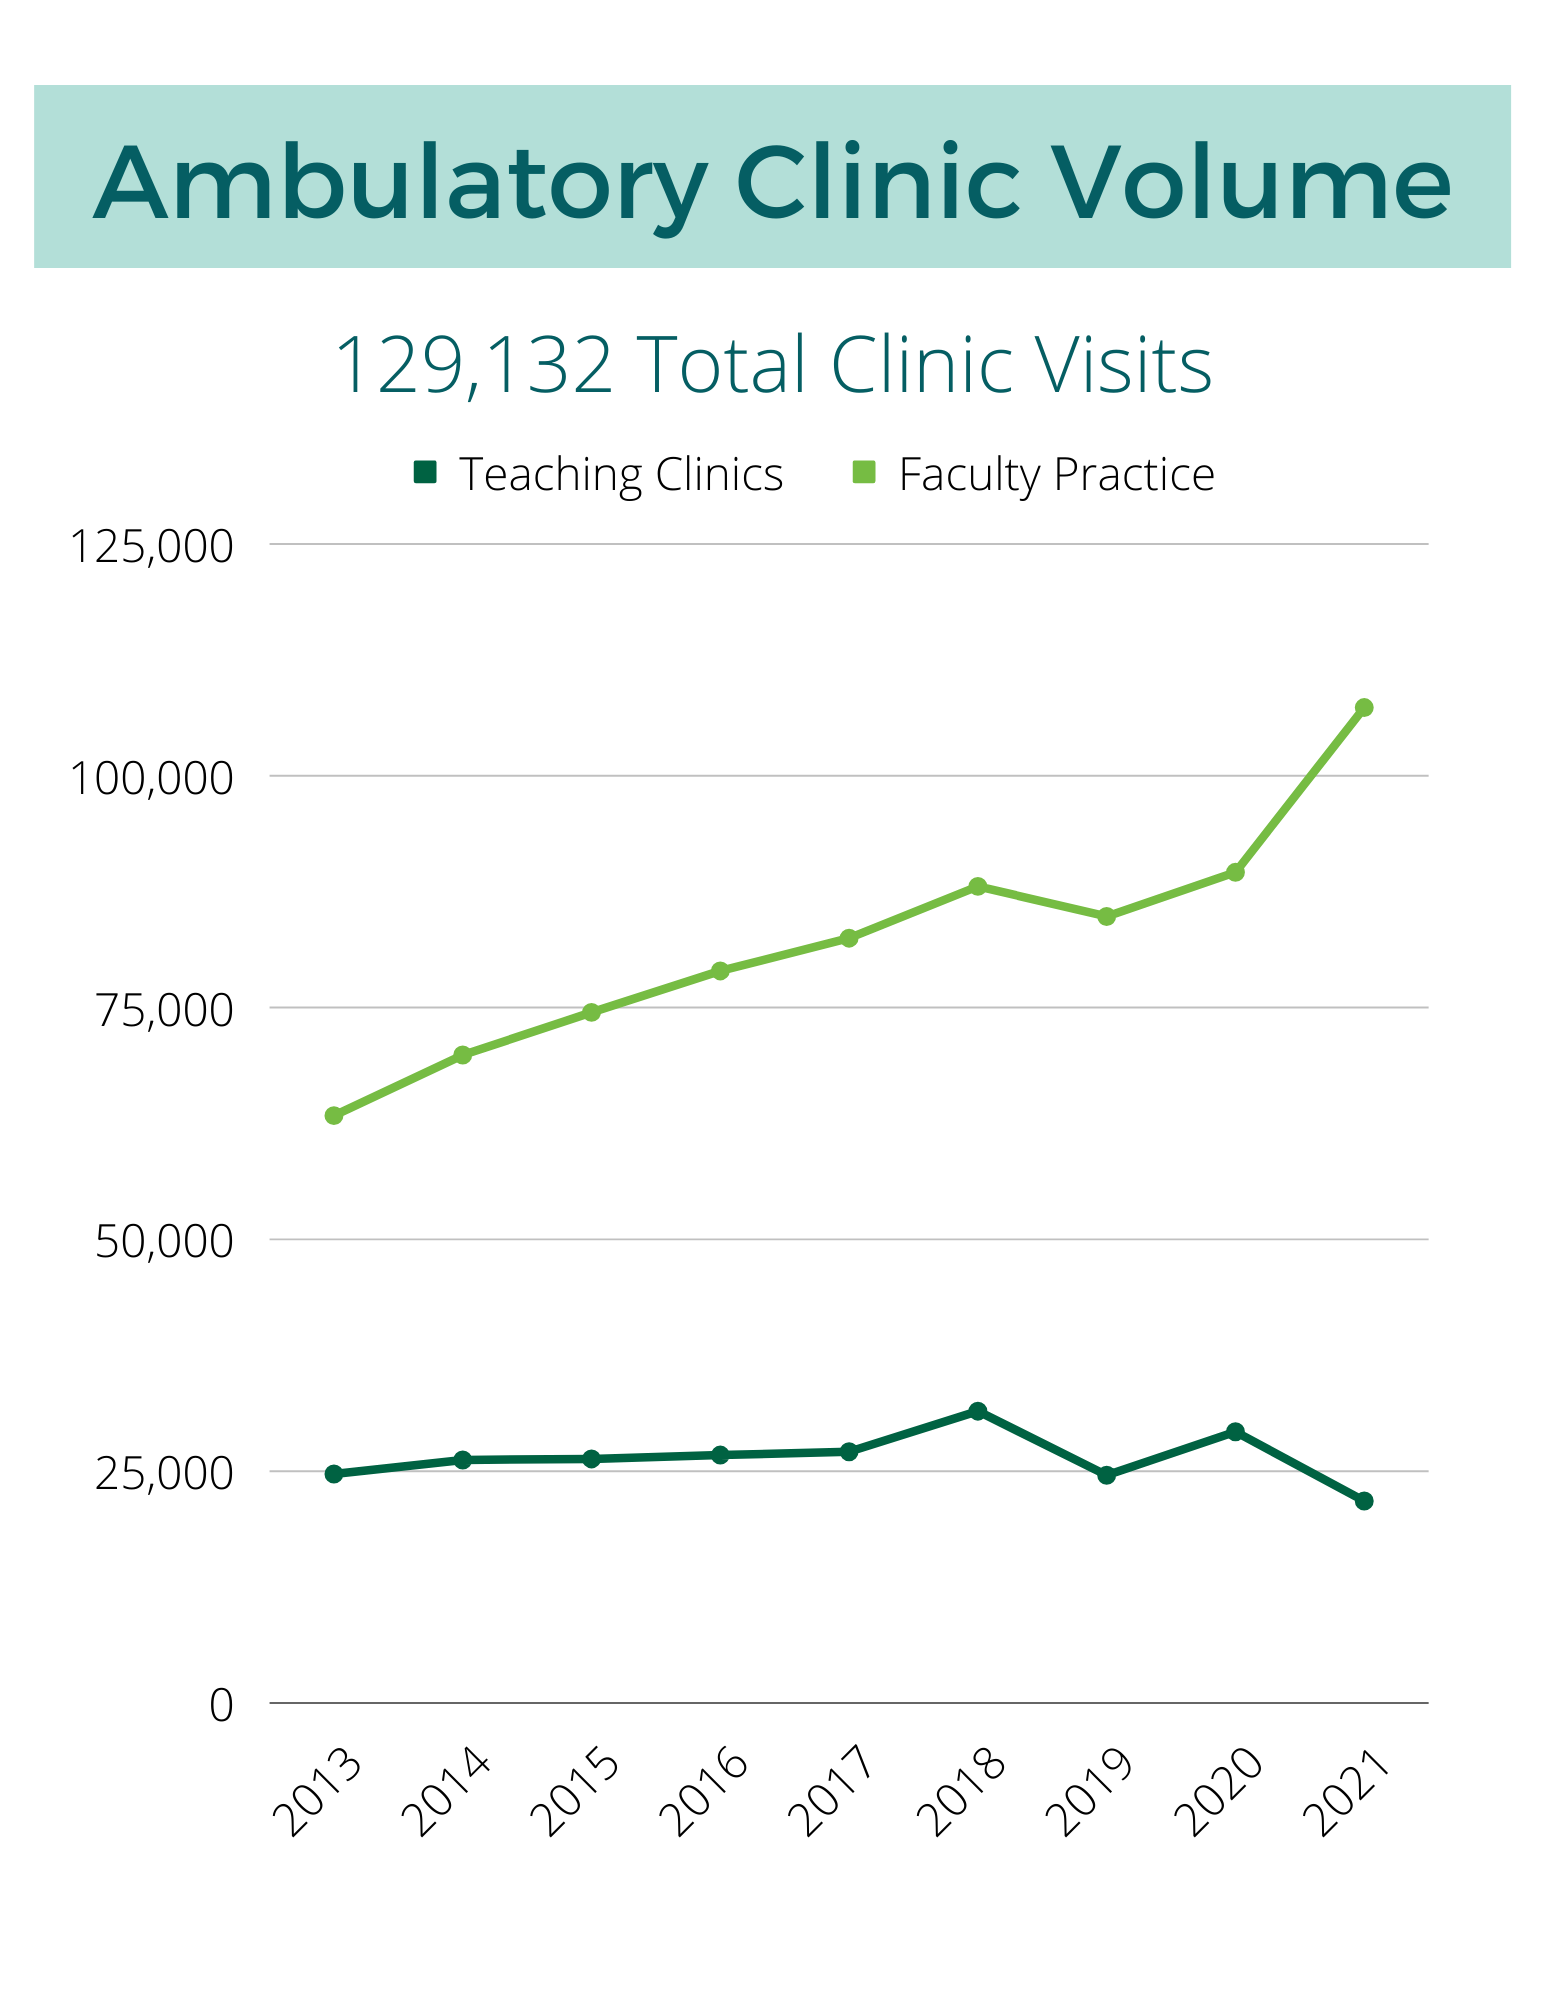 Clinics See Record Numbers in 2021